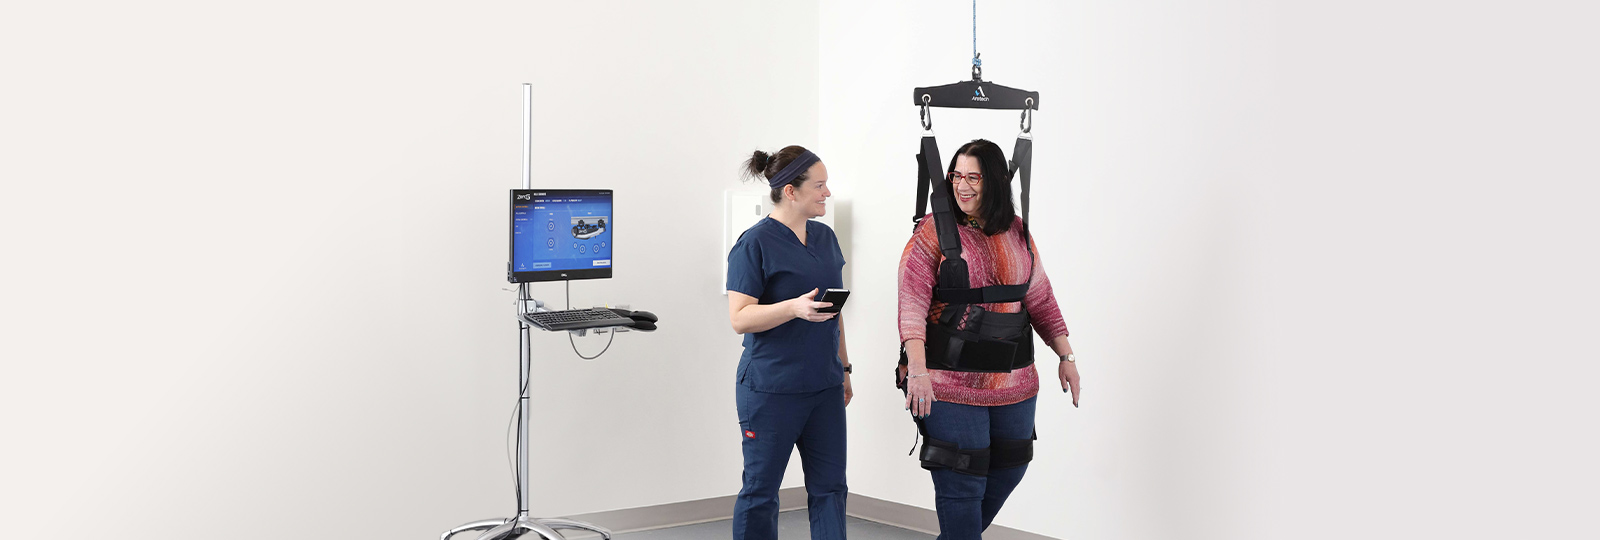 ZeroG: Safer Treatment for Balance Issues - CentraState Healthcare System